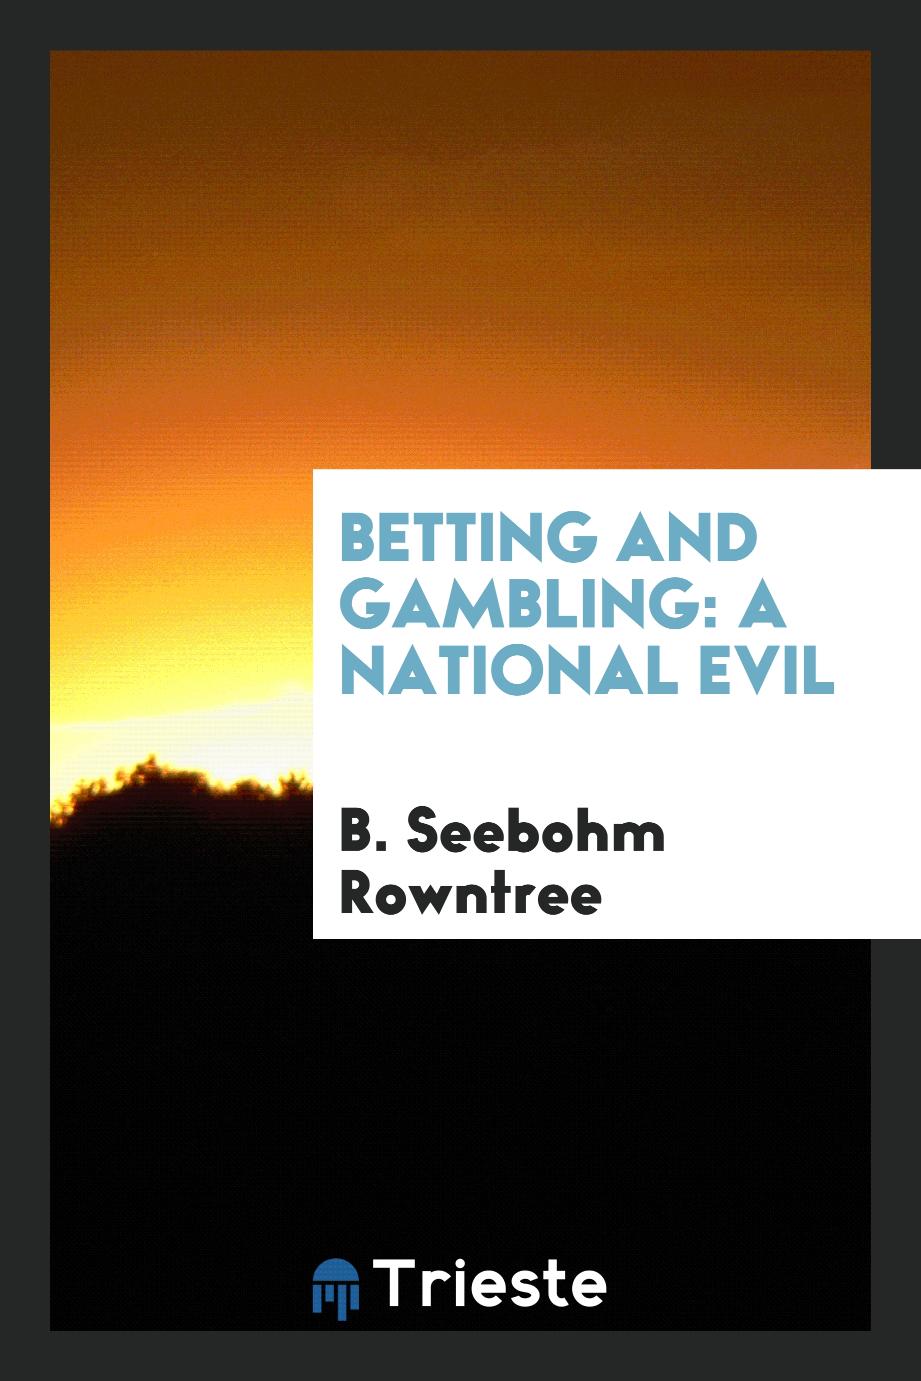 Betting and gambling: a national evil